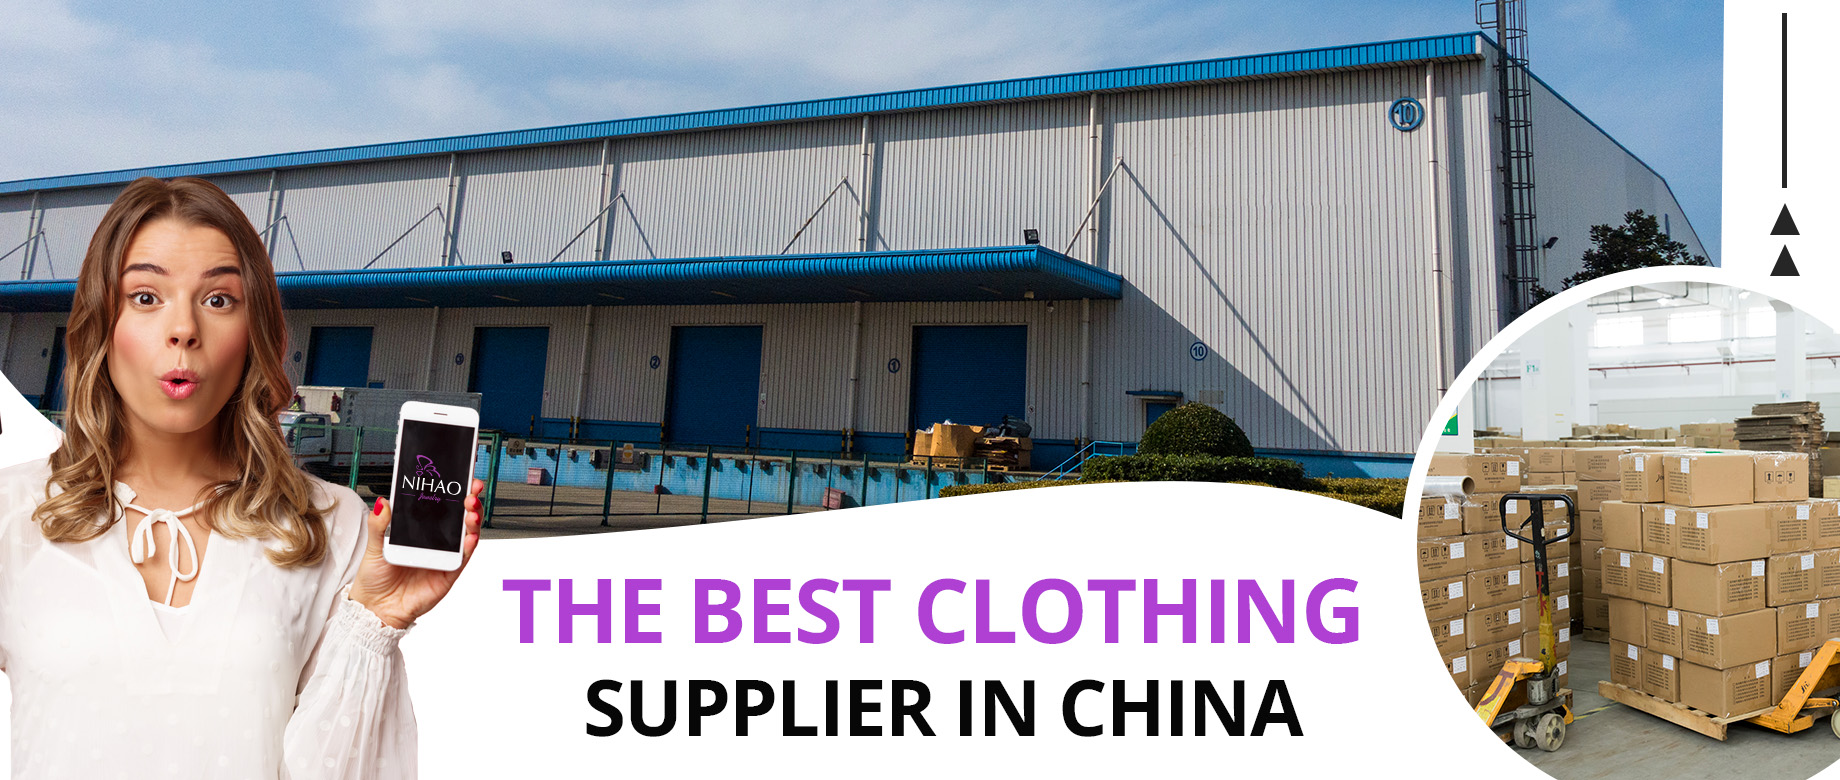 the best clothing supplier in china
